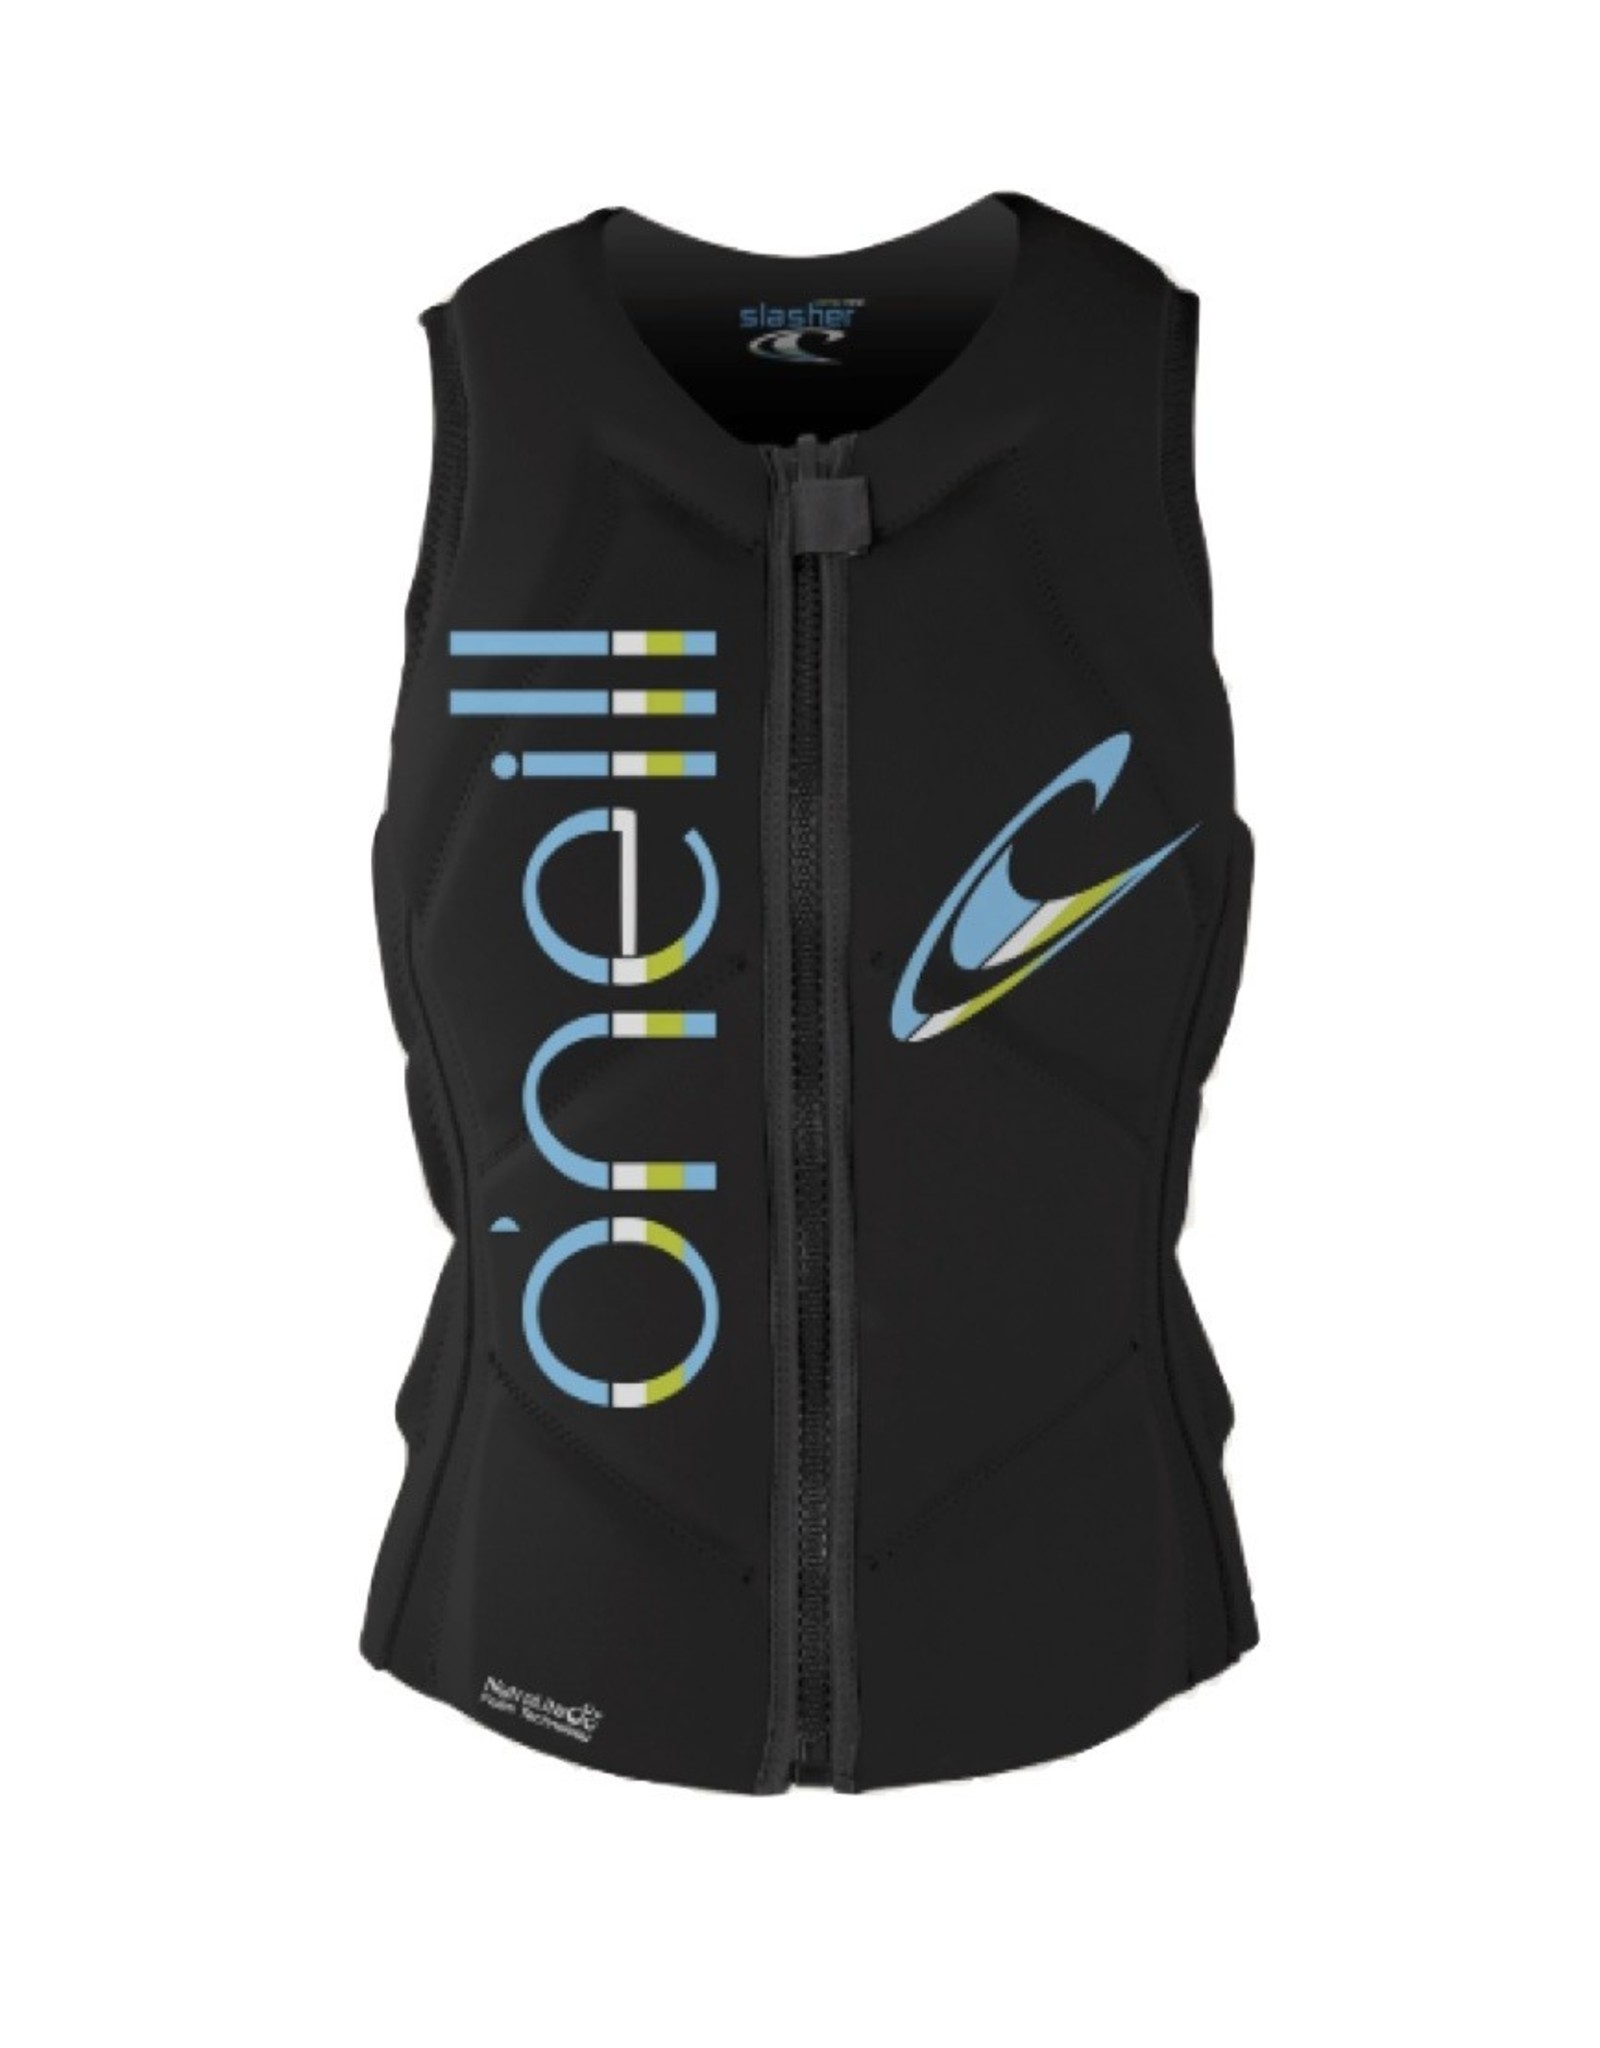 Flexible and lightweight, the Women’s Spark Flex V-Back gives you all of the safety, comfort and performance you could ask for from CGA life jacket. With multiple hinges and the V-Back stretch panel, this vest provides unsurpassed mobility